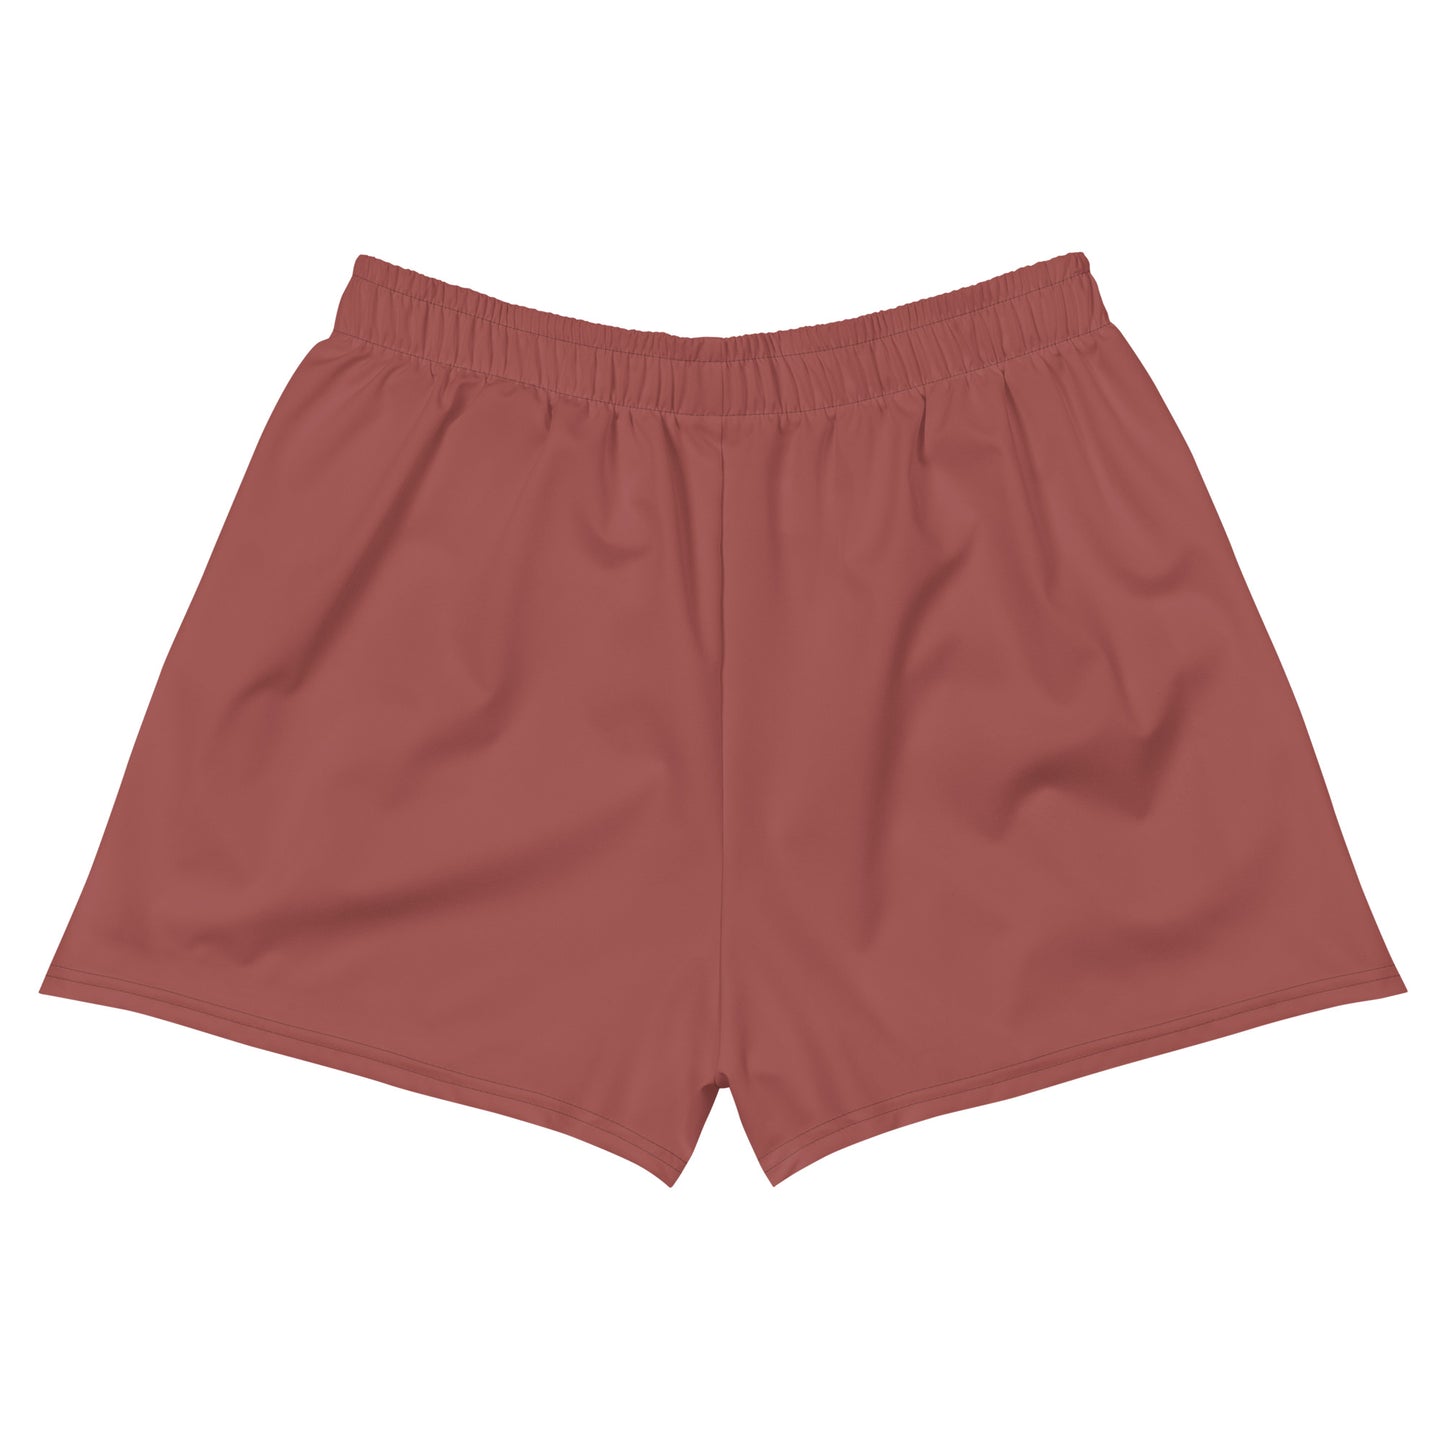 Roof Terracotta Athletic Shorts